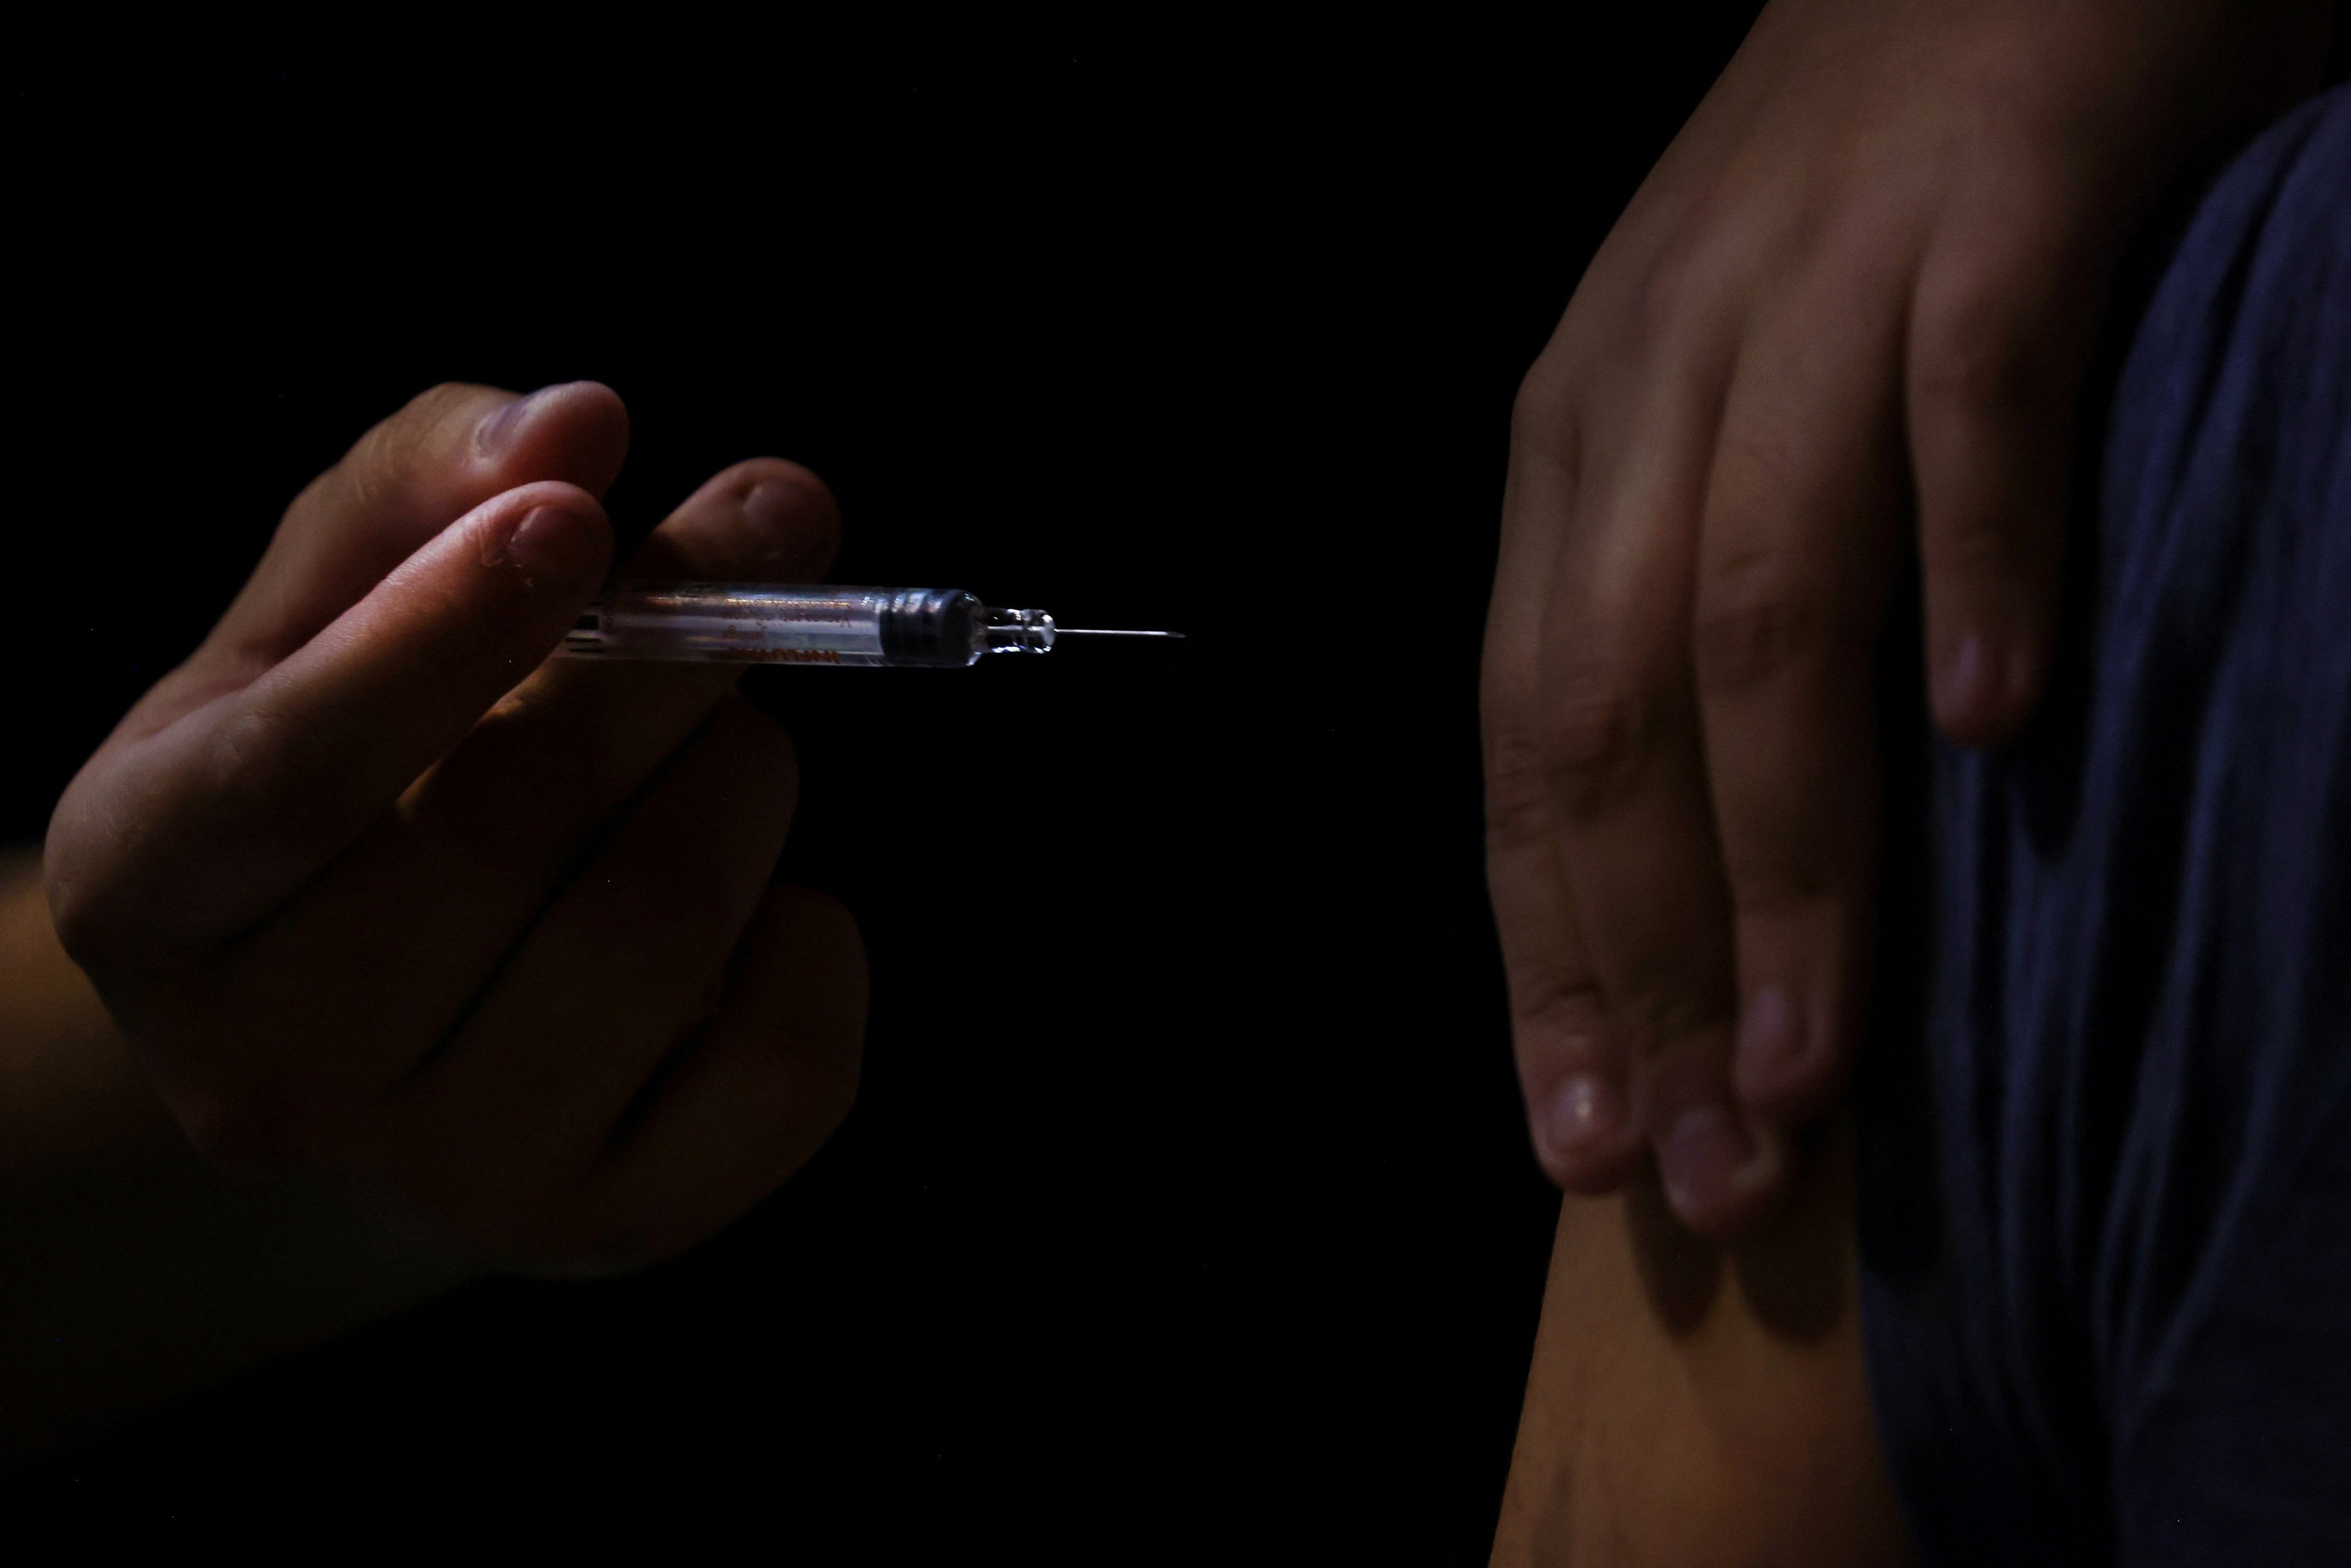 An Australian man was sentenced to 16 weeks’ jail for paying a Singapore doctor to get a fake Covid-19 vaccination certificate. File photo: Reuters